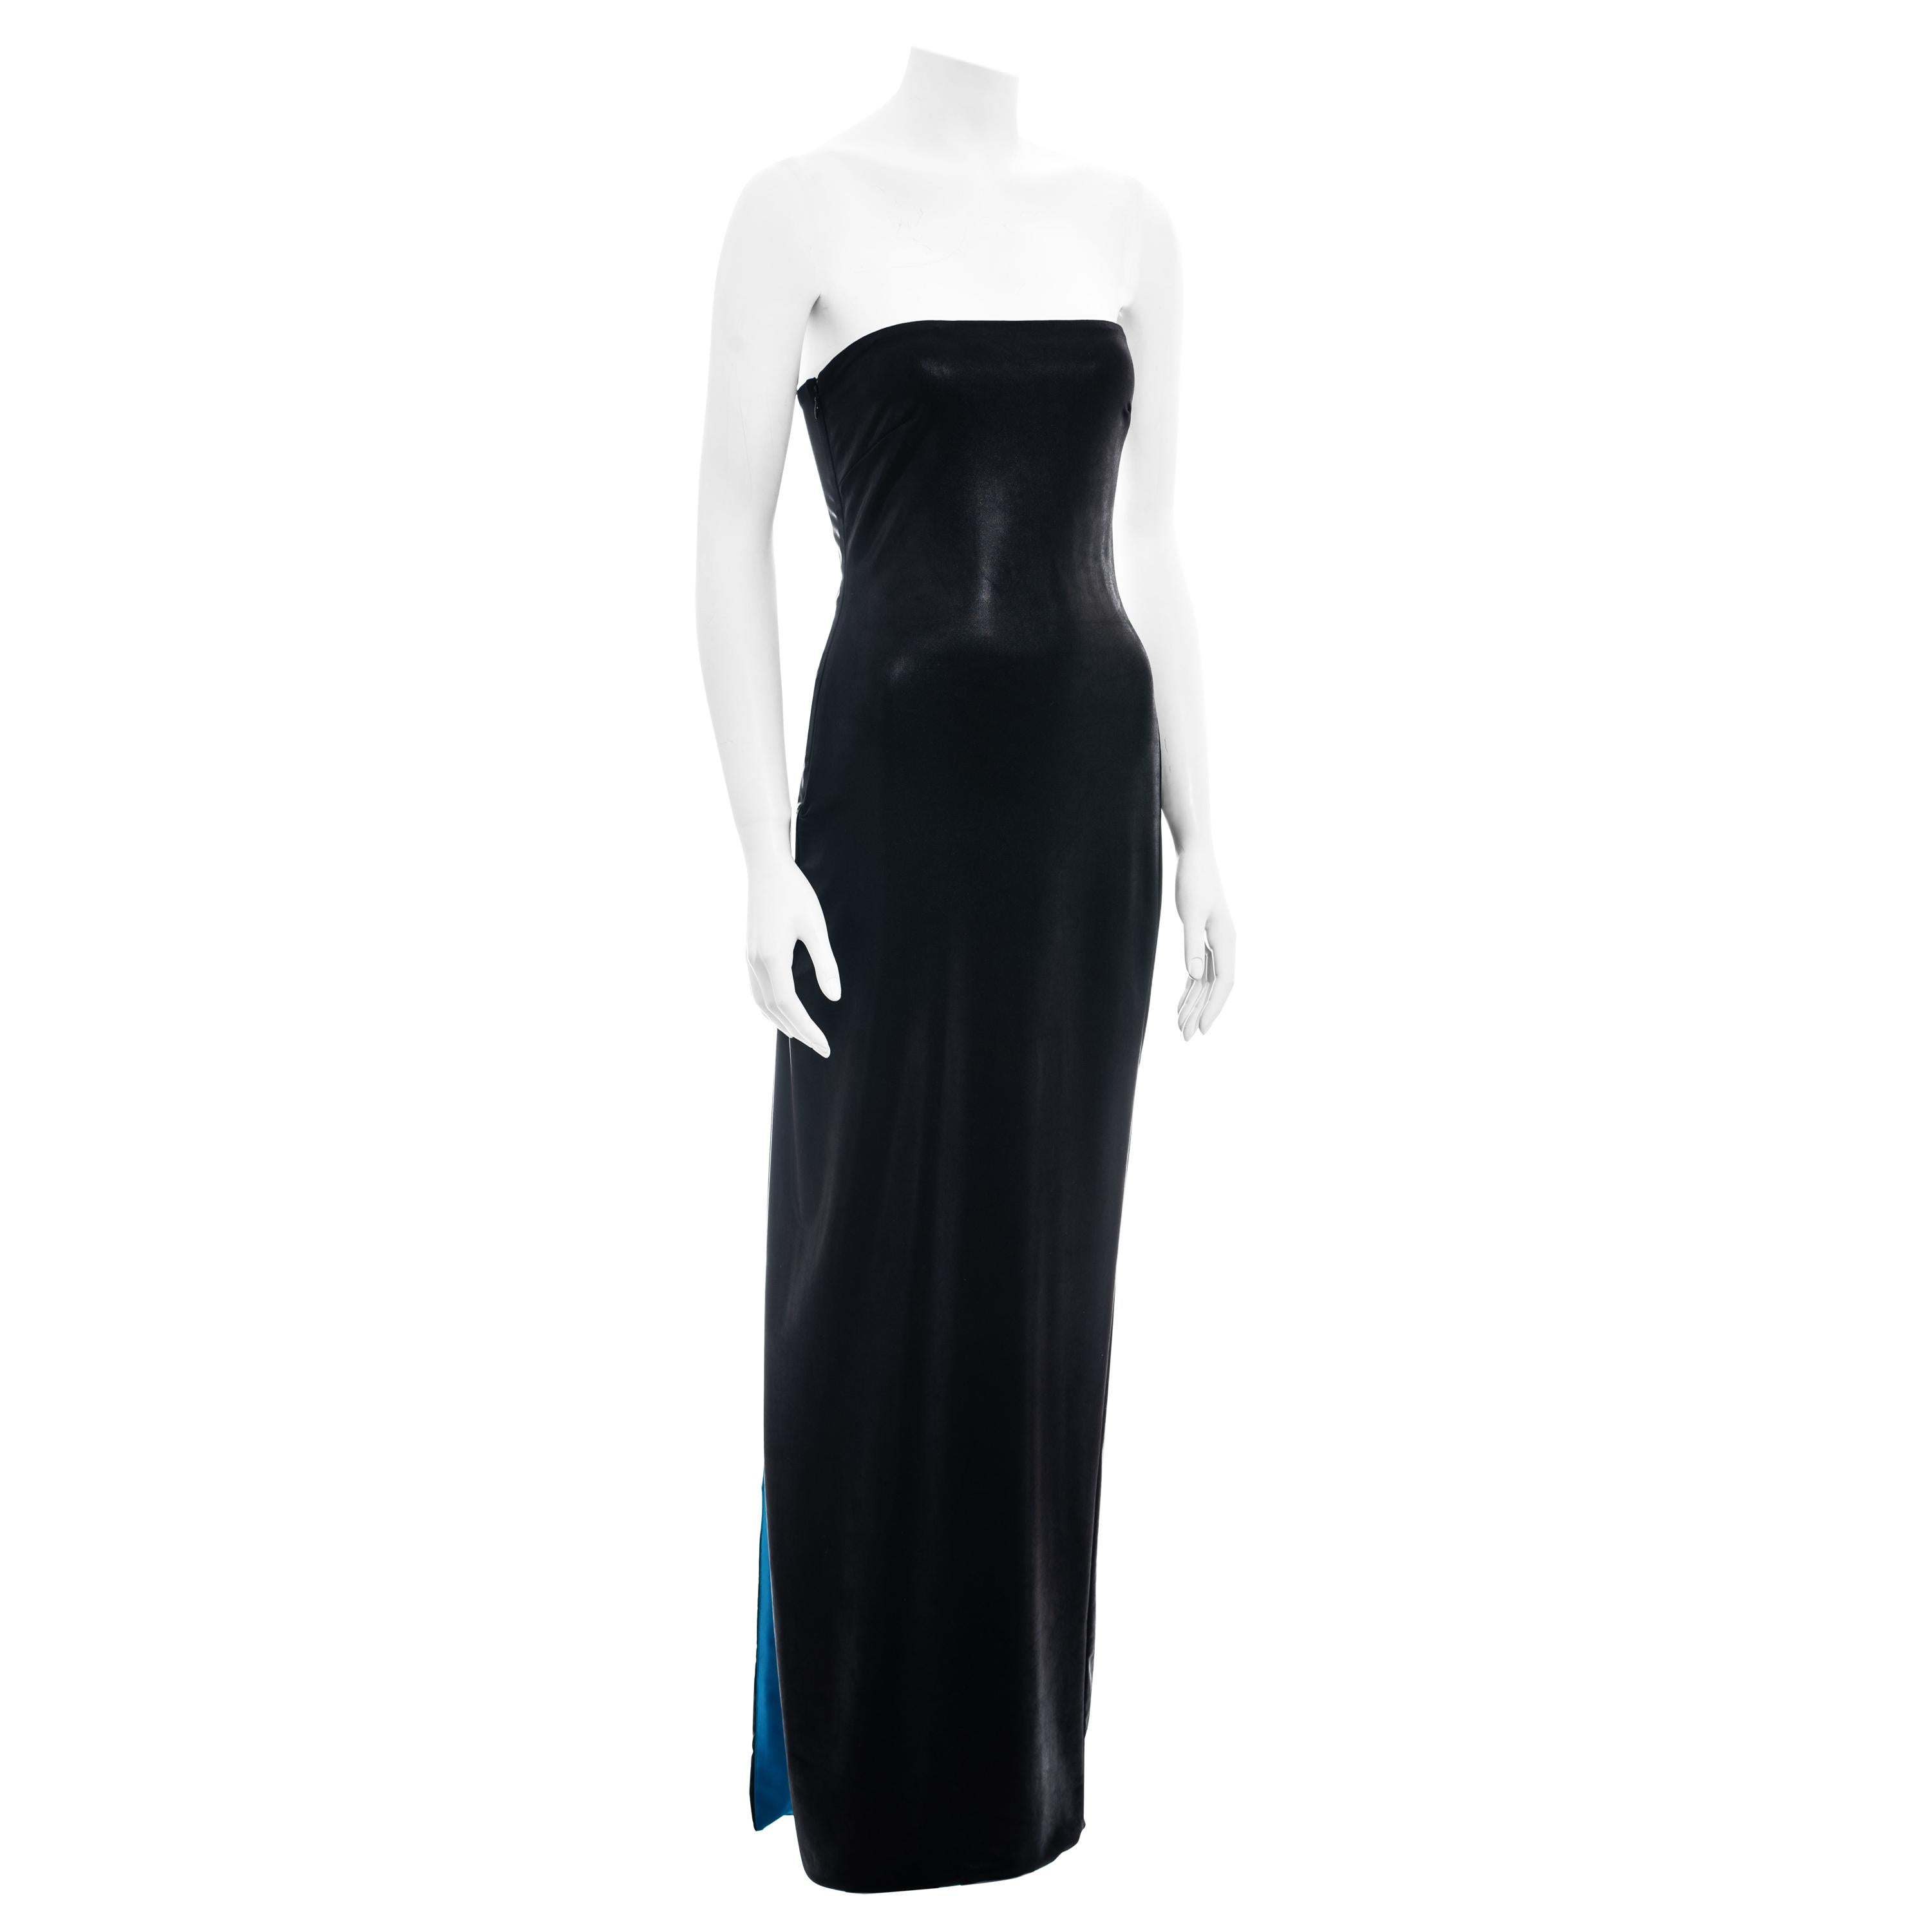 Gianni Versace black and electric blue strapless maxi dress, ss 1998